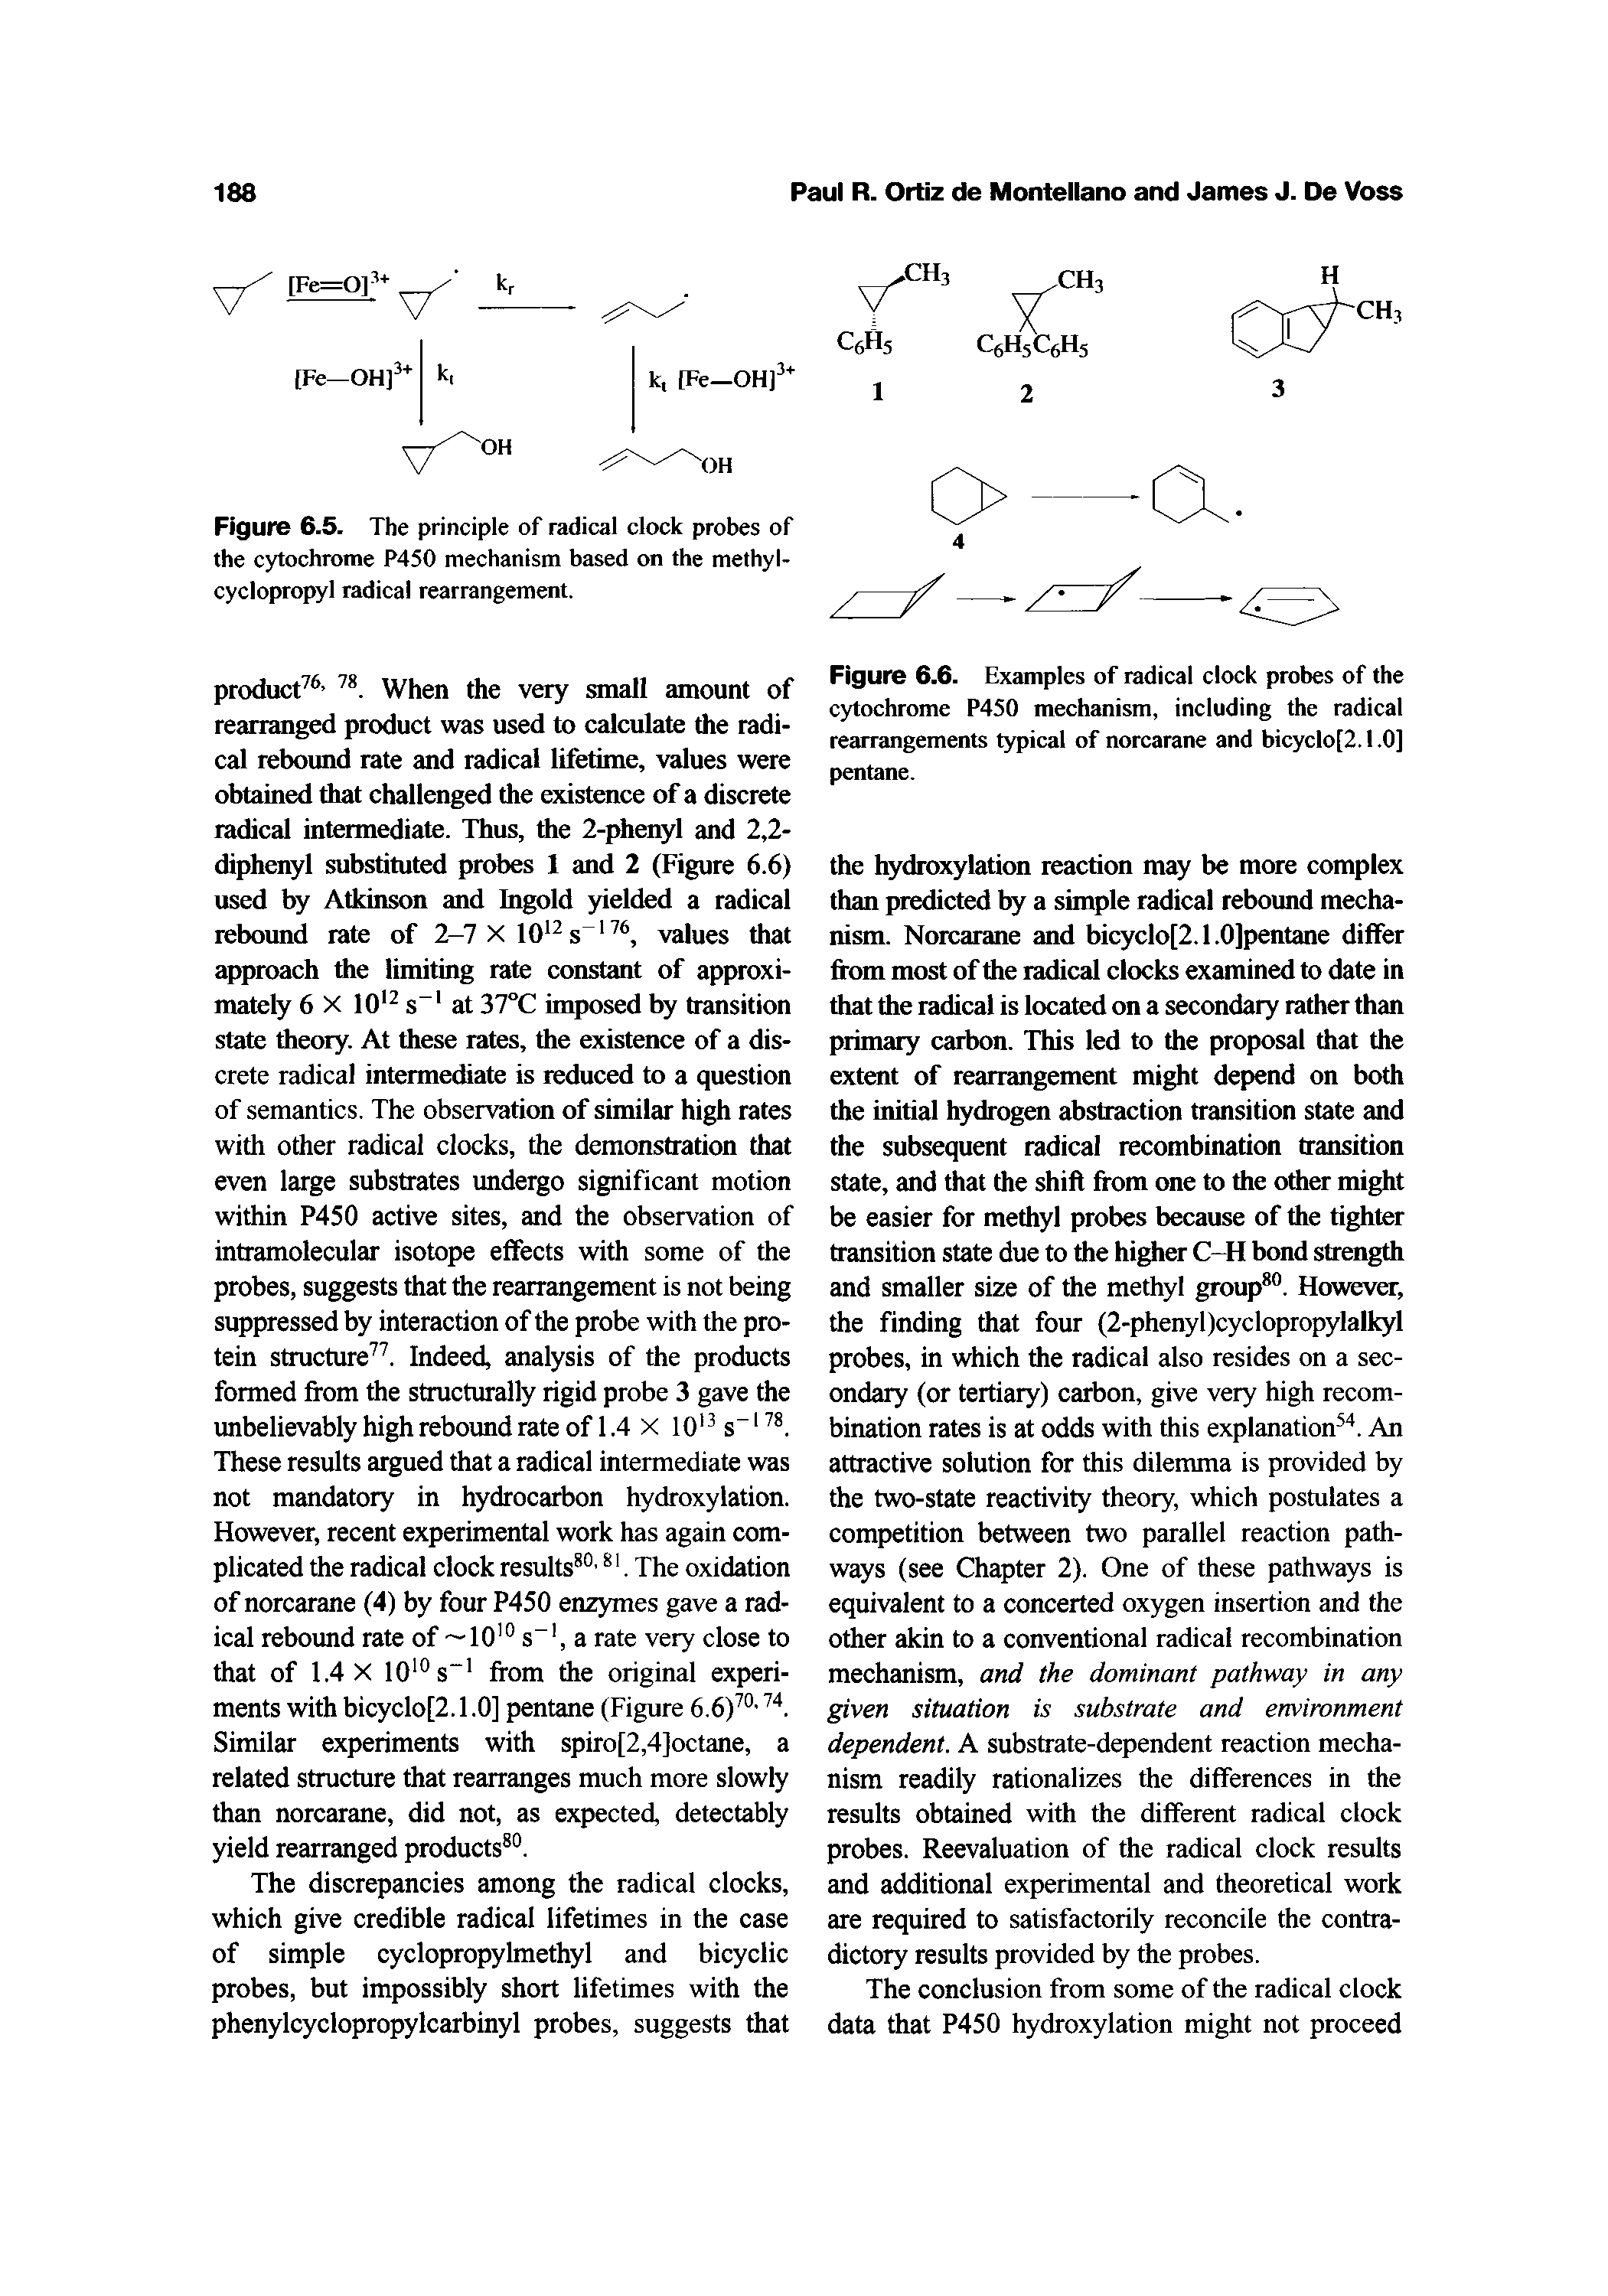 Figure 6.6. Examples of radical clock probes of the cytochrome P450 mechanism, including the radical rearrangements typical of norcarane and bieyclo[2.I.O] pentane.